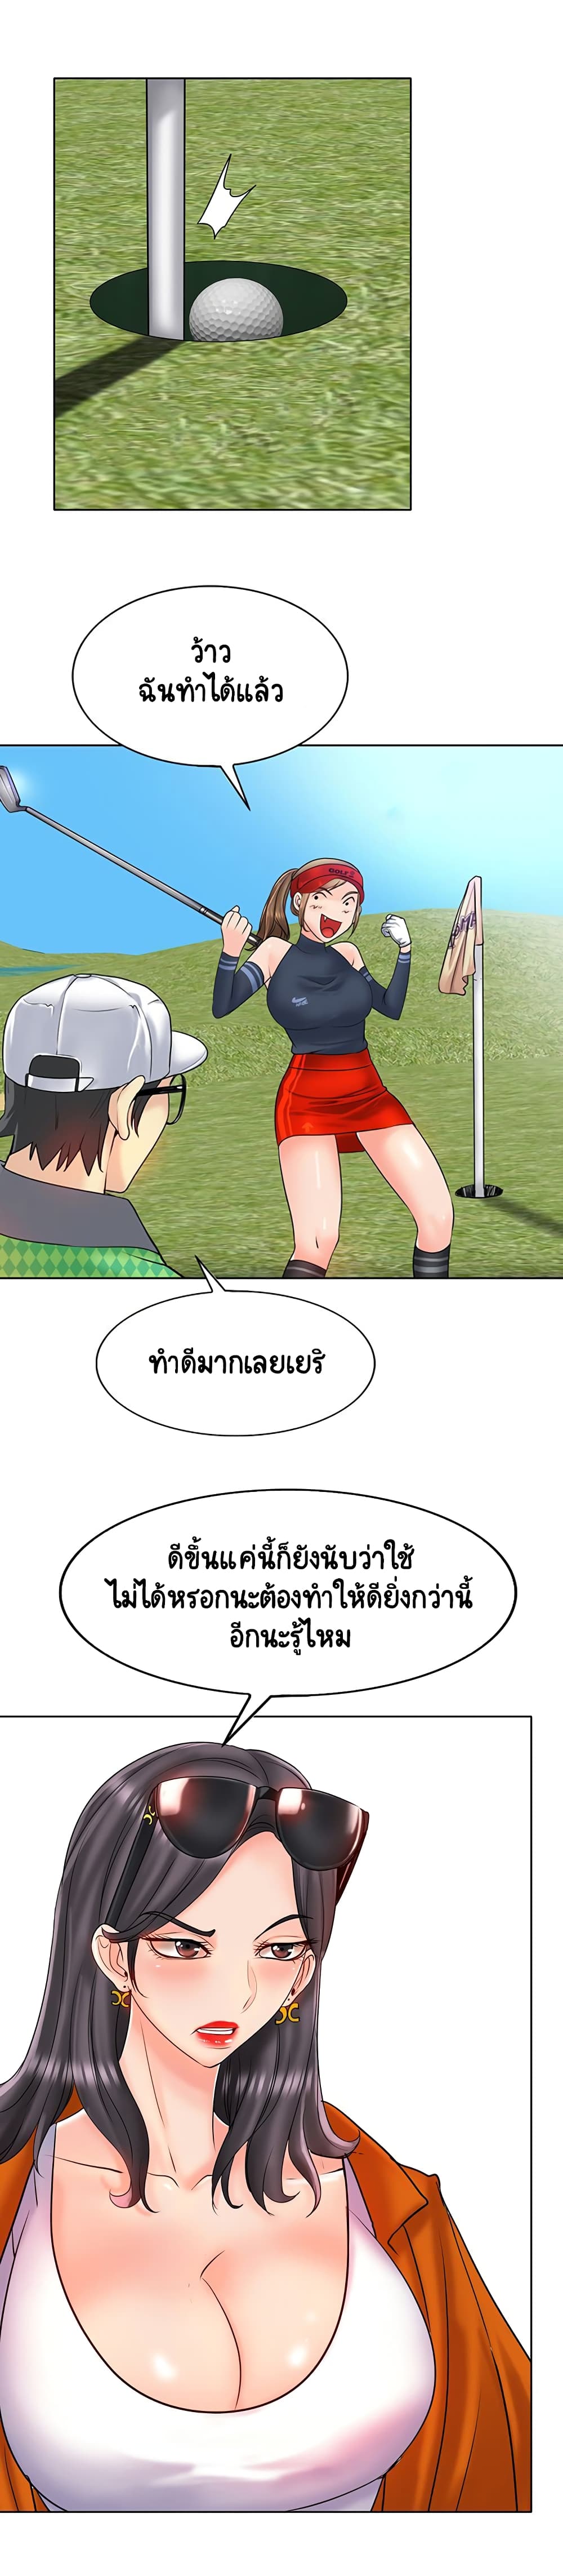 Hole In One 21 (7)